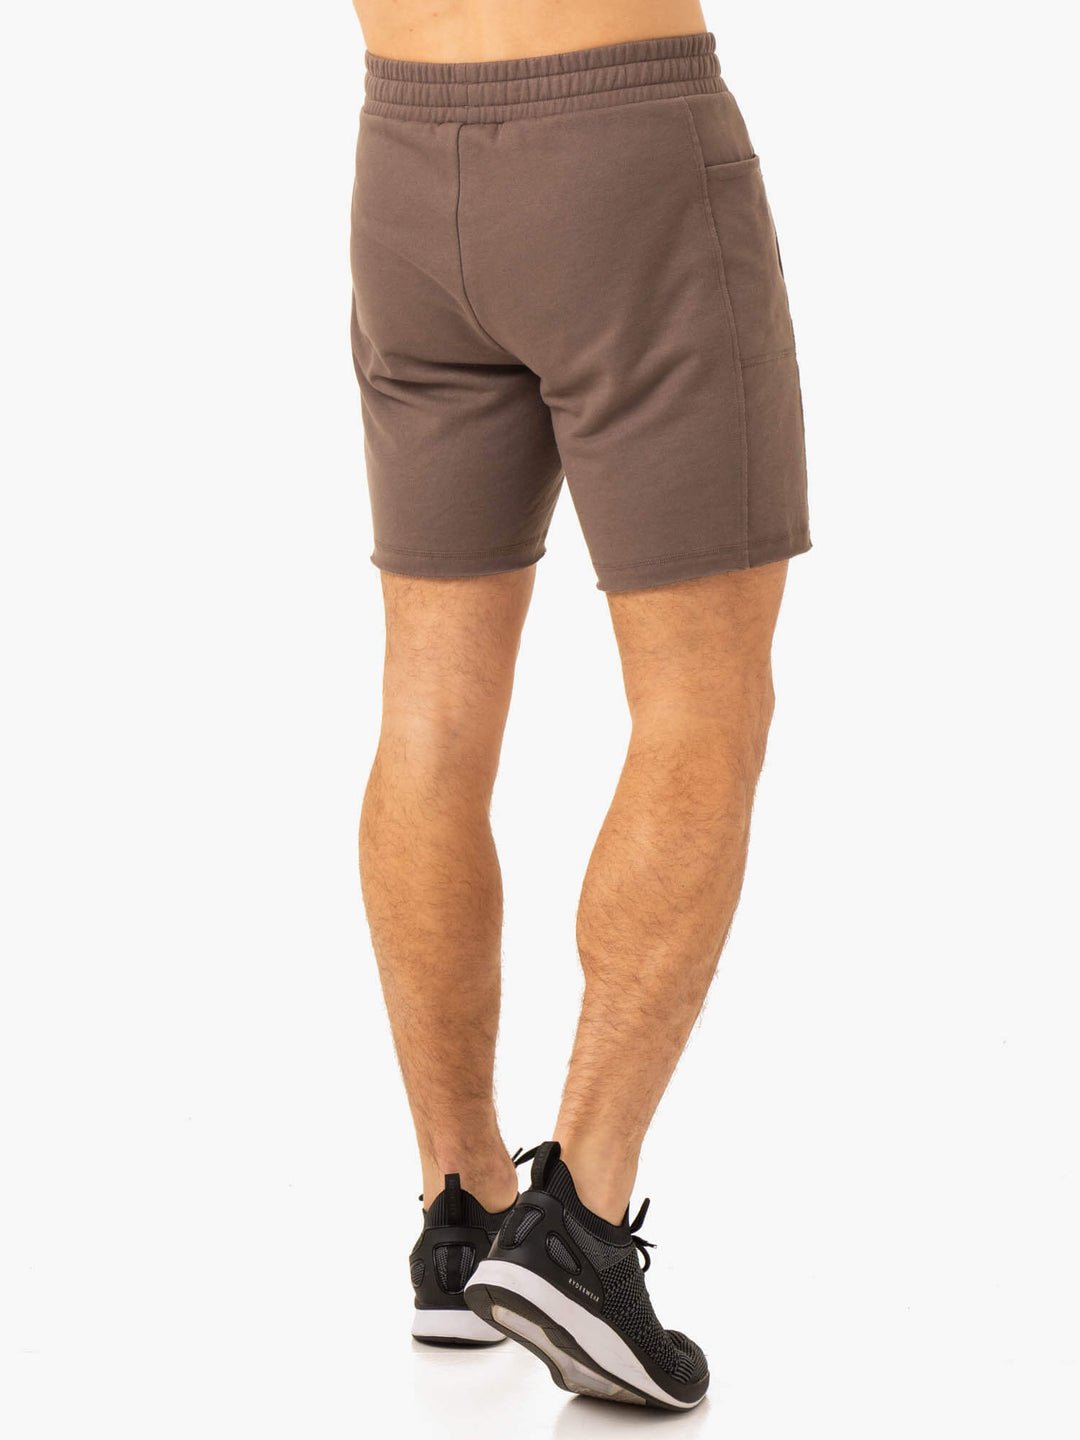 Pursuit Track Shorts - Taupe Clothing Ryderwear 